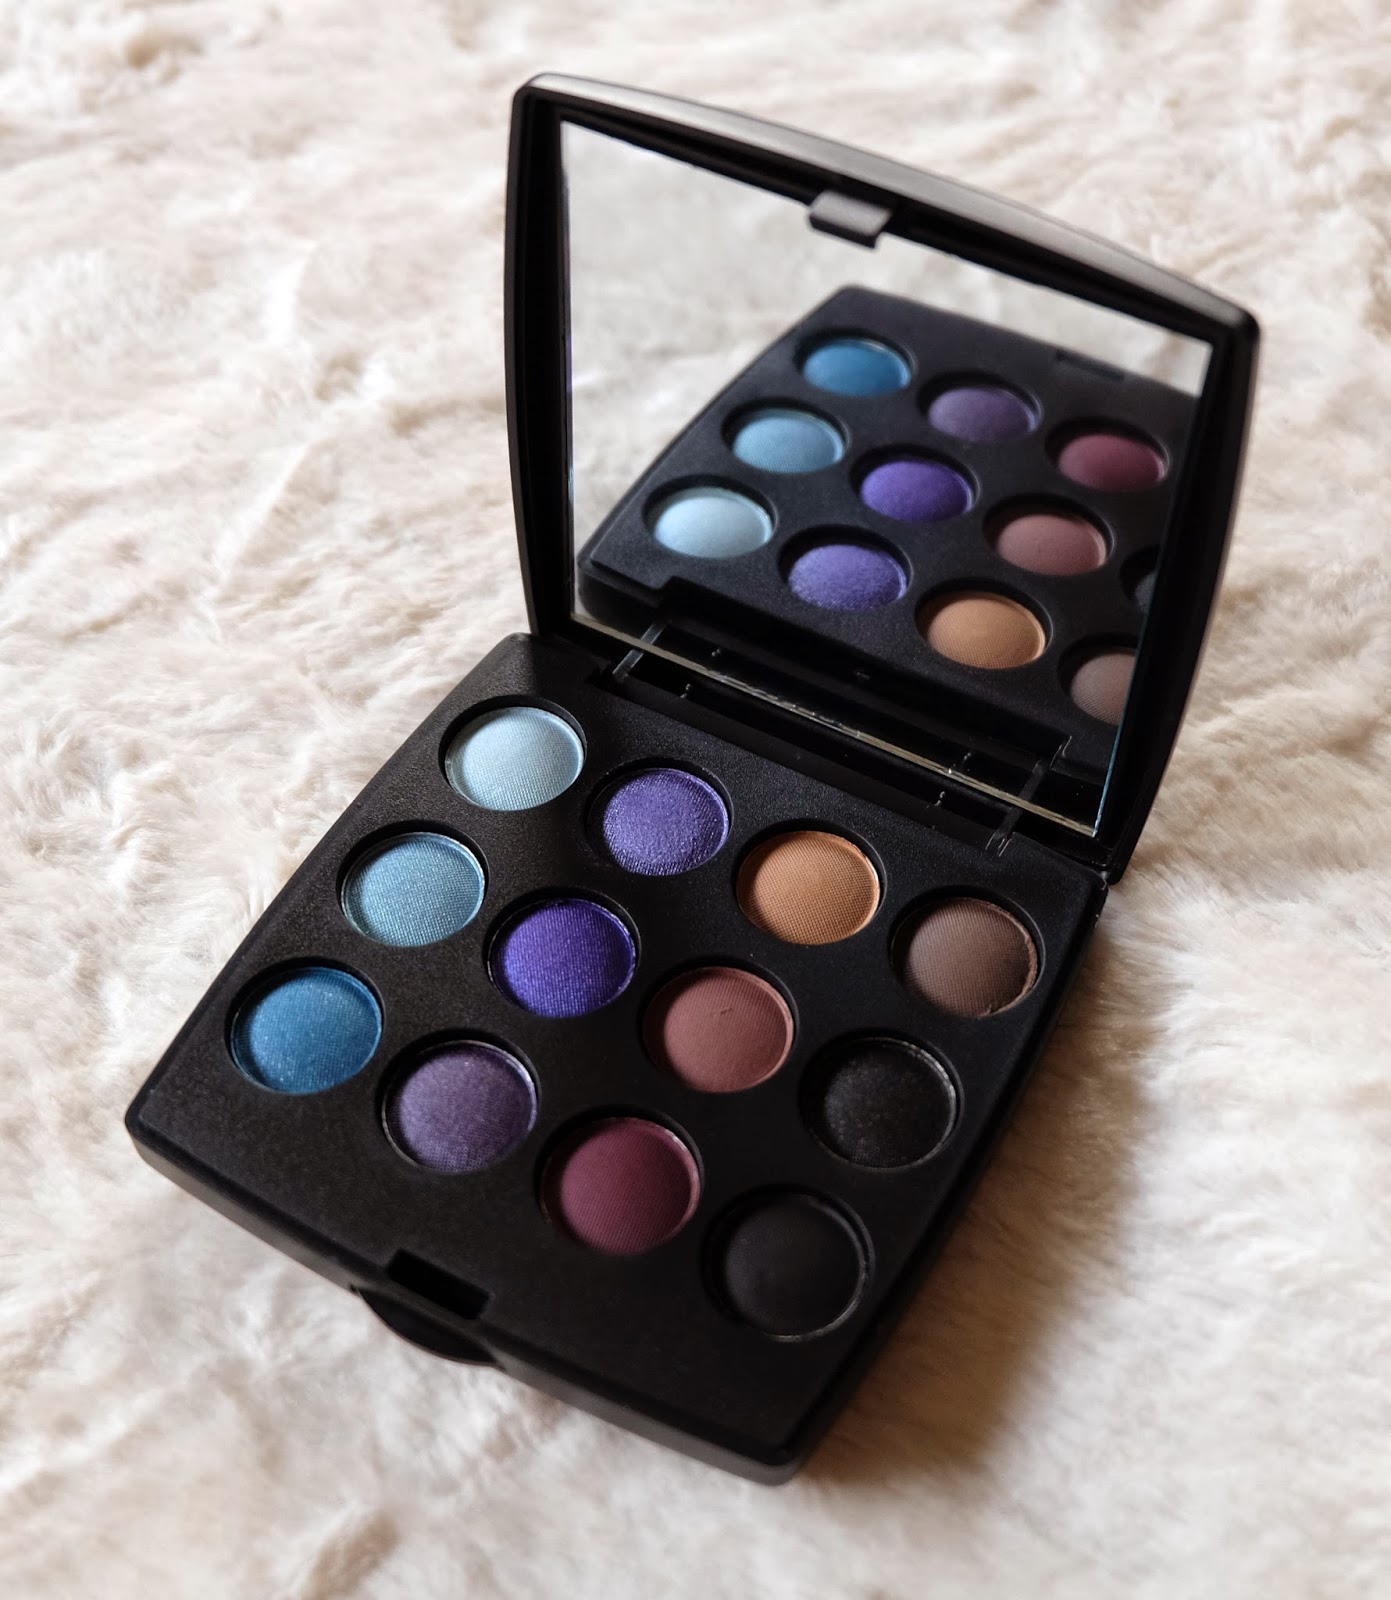 coastal scents eyeshadow palette review